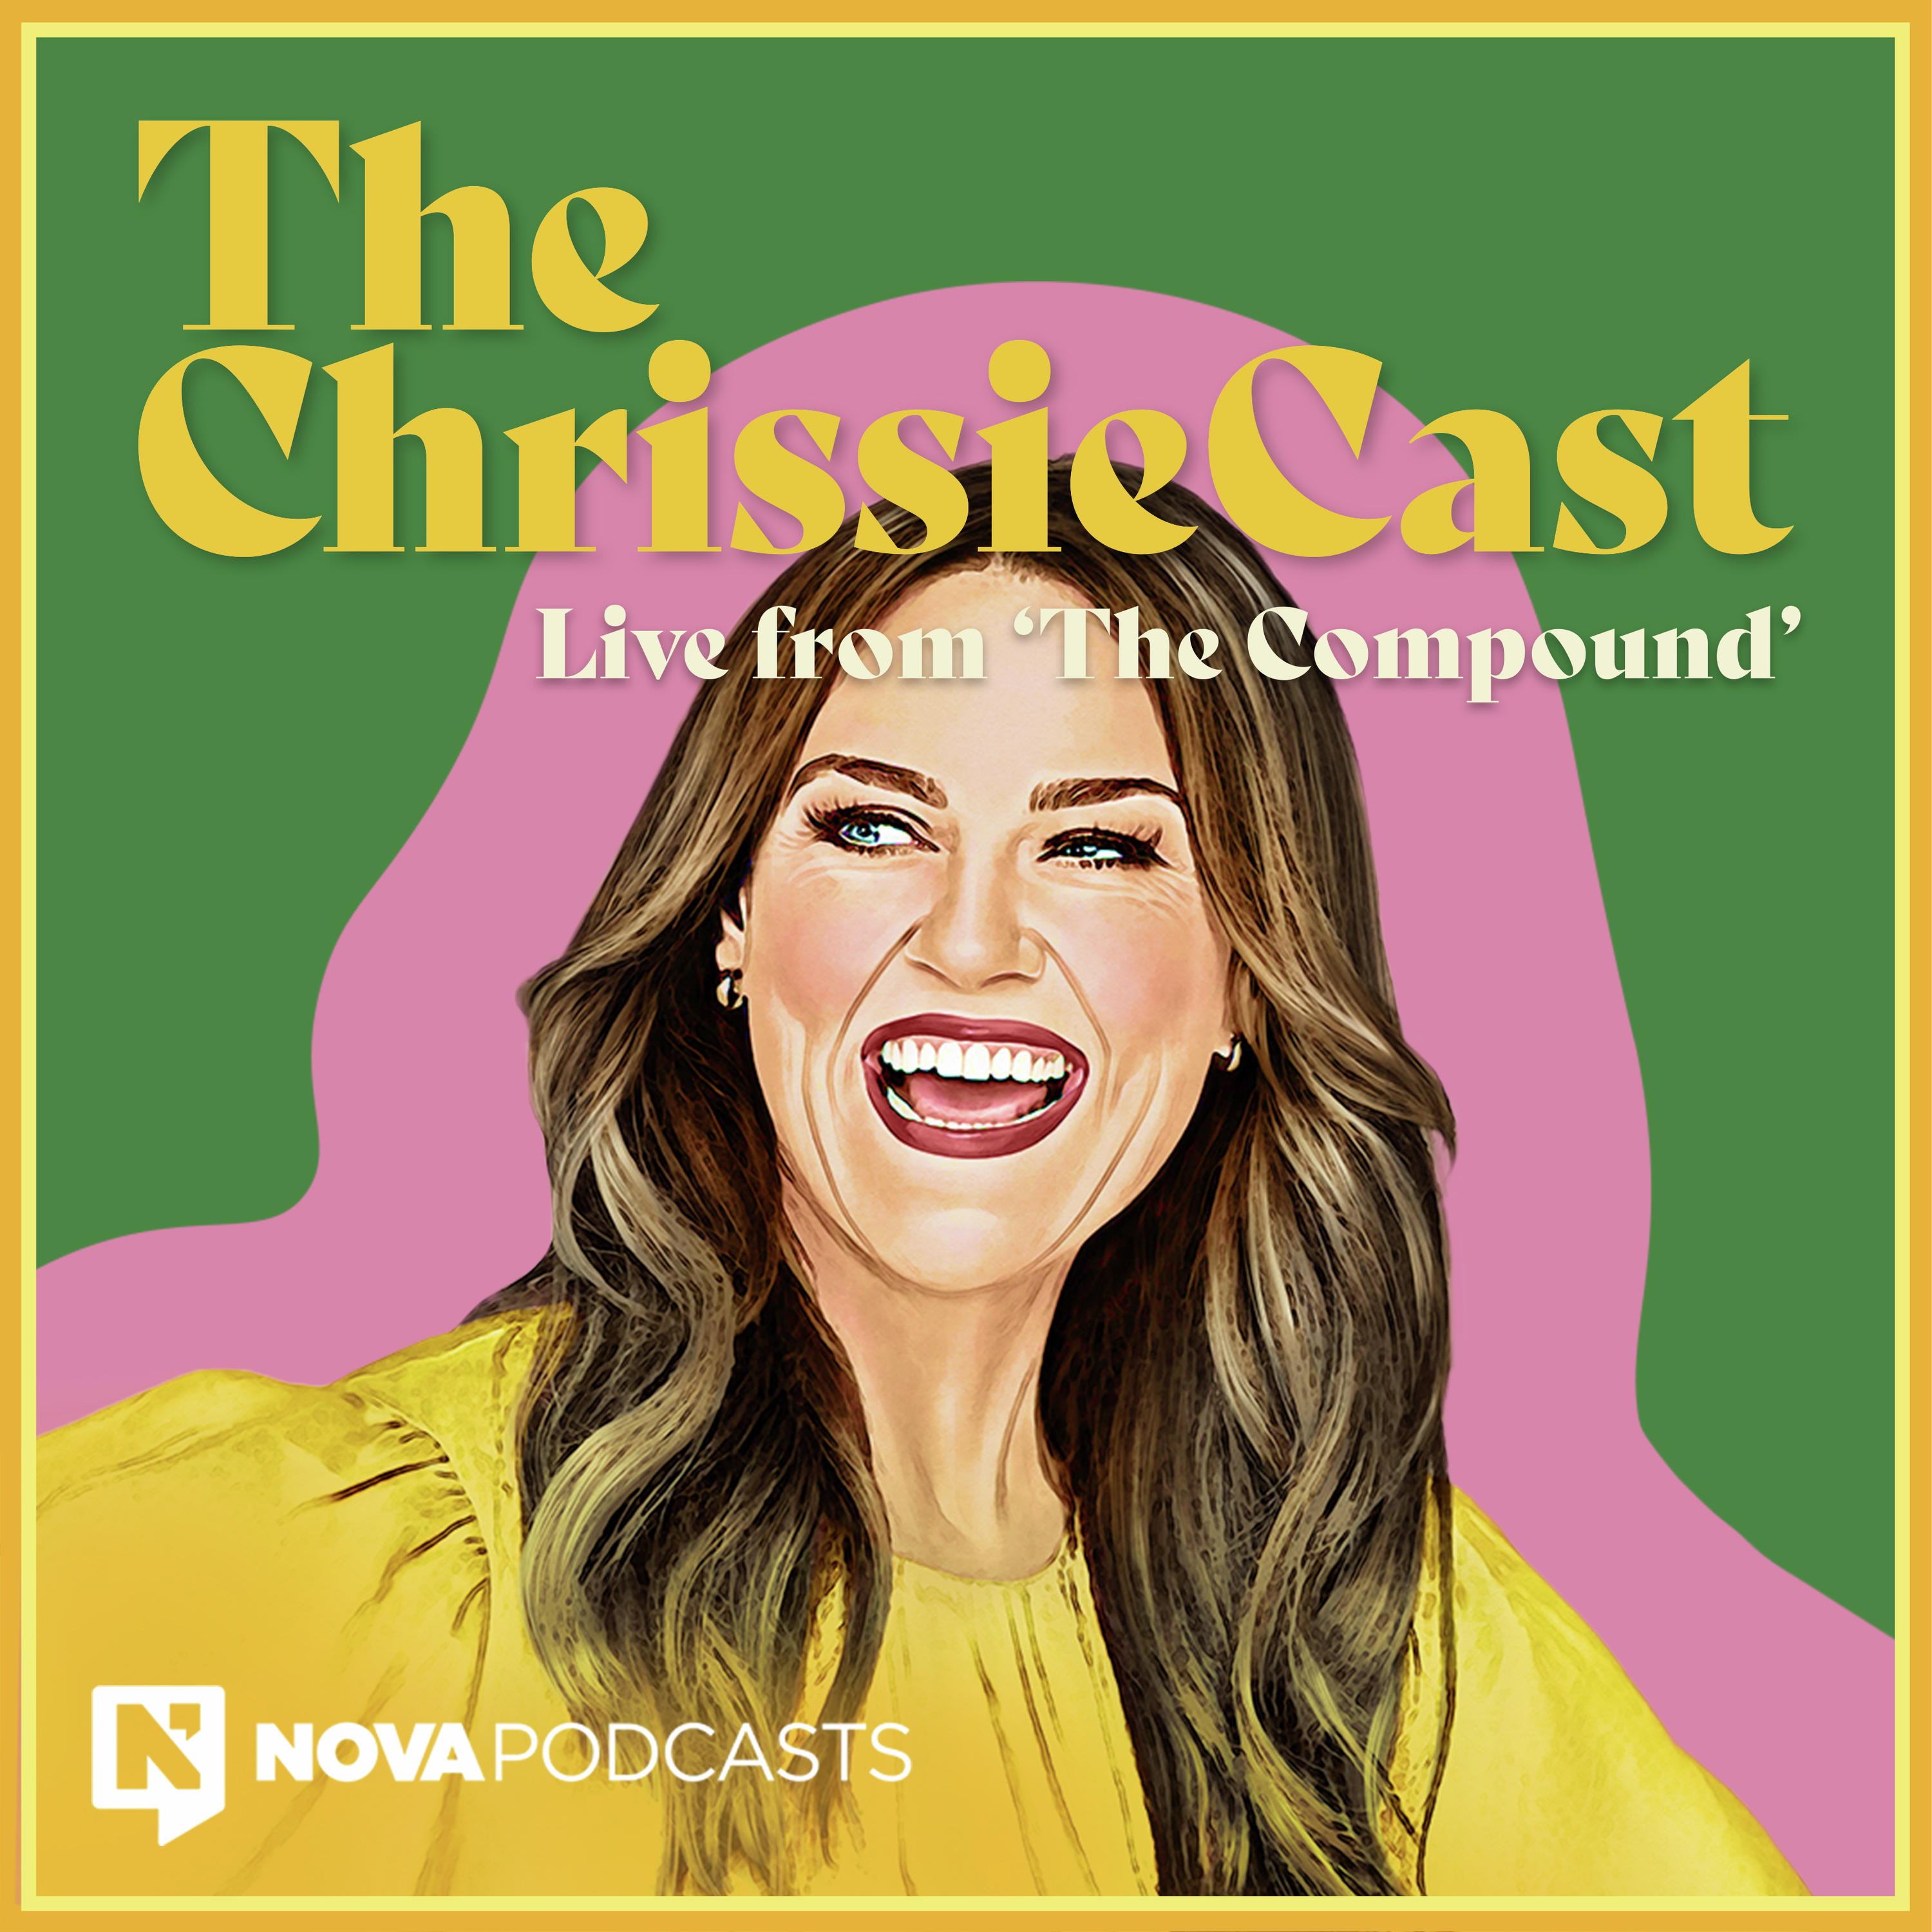 The ChrissieCast: Heidi Clements Talks Female Relationships, Late Onset Tattooing And Praying To Her Vagina